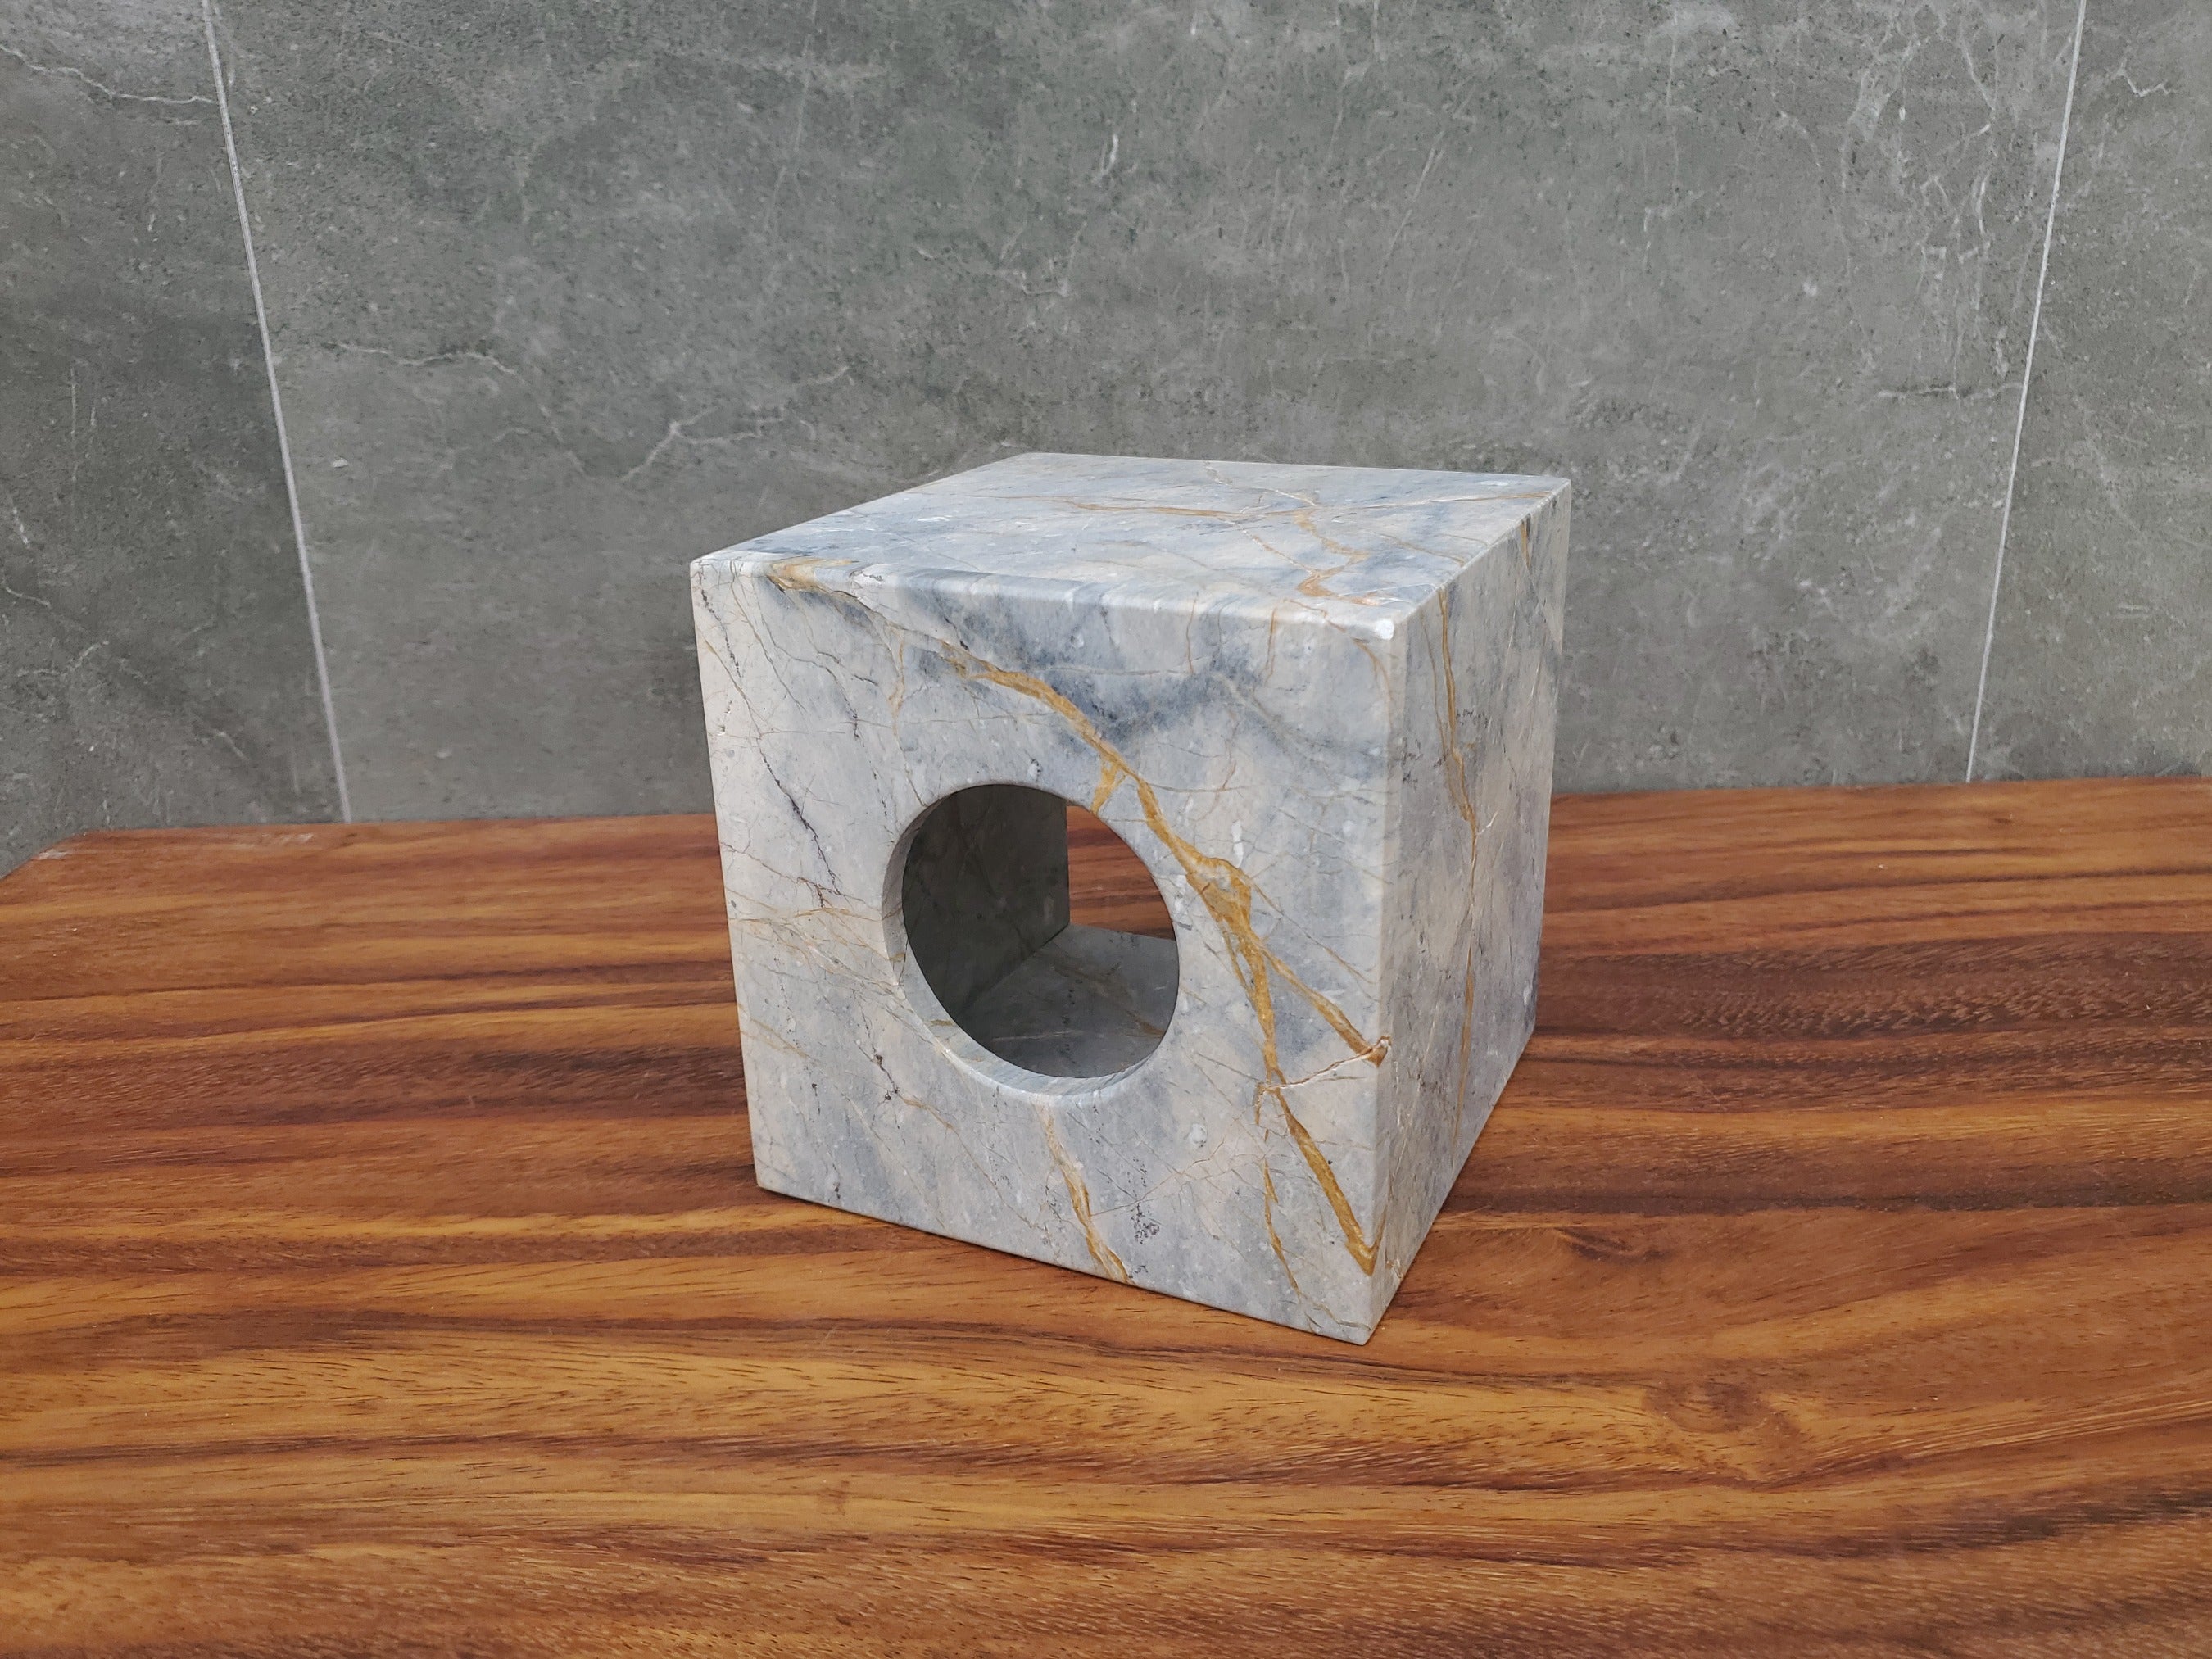 Gray and Gold Marble Tissue Box Cover. Hand carved from one piece of stone. Handmade in Mexico. Ships from the USA. Buy now at www.felipeandgrace.com.